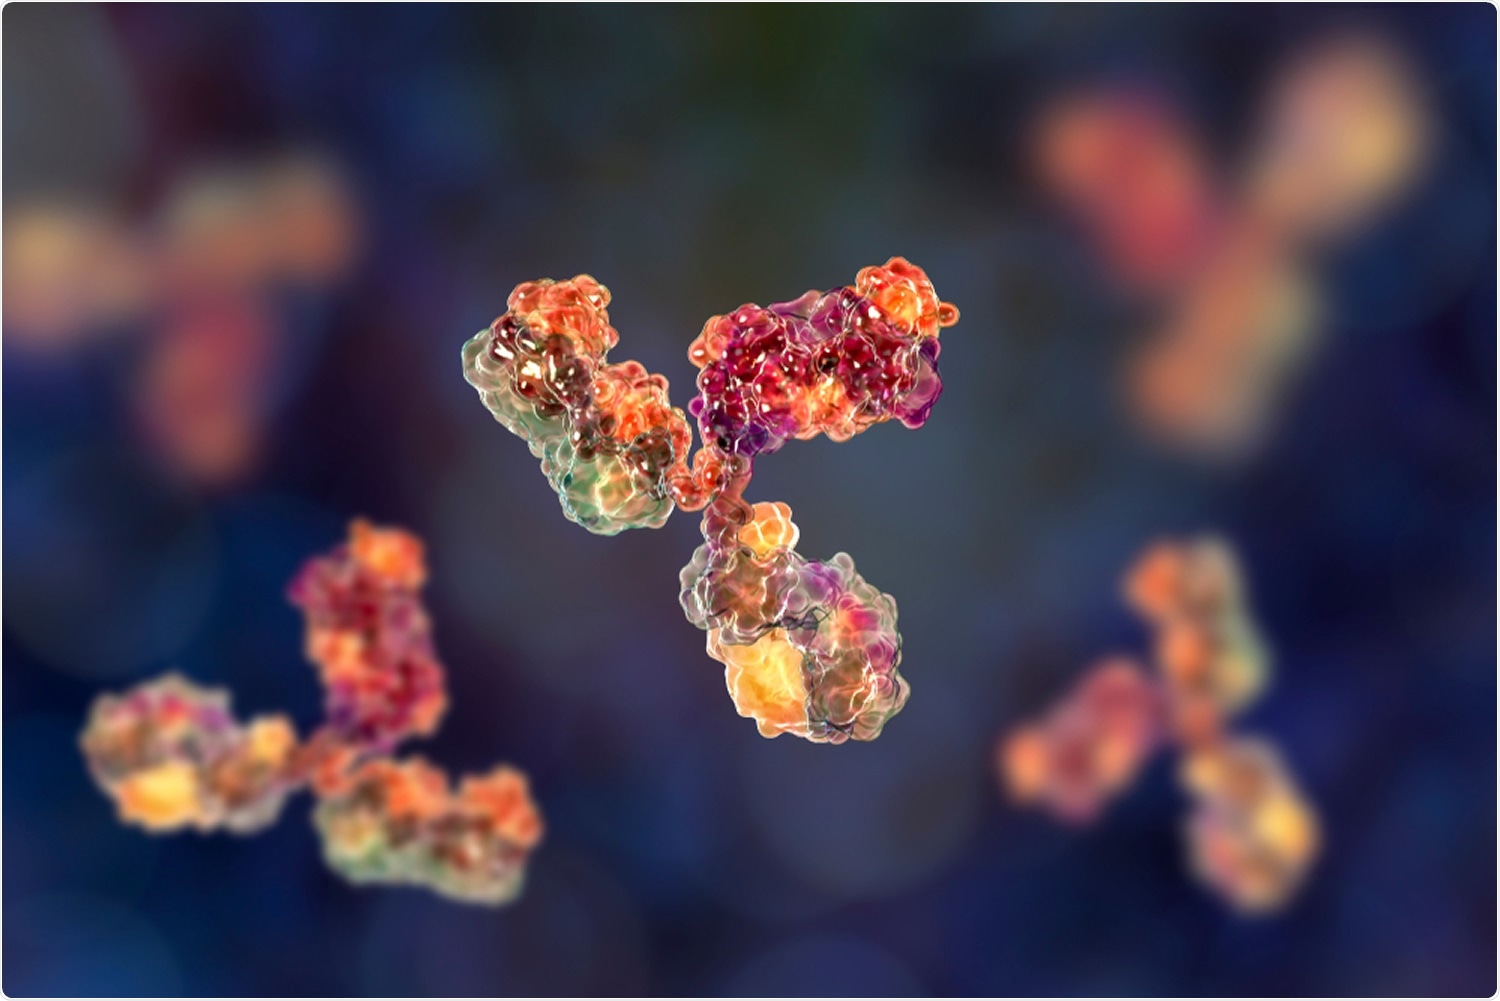 Study: Determination of human COVID-19 total antibodies in serum using a time-resolved fluorescence immunoassay. Image Credit:  Kateryna Kon / Shutterstock